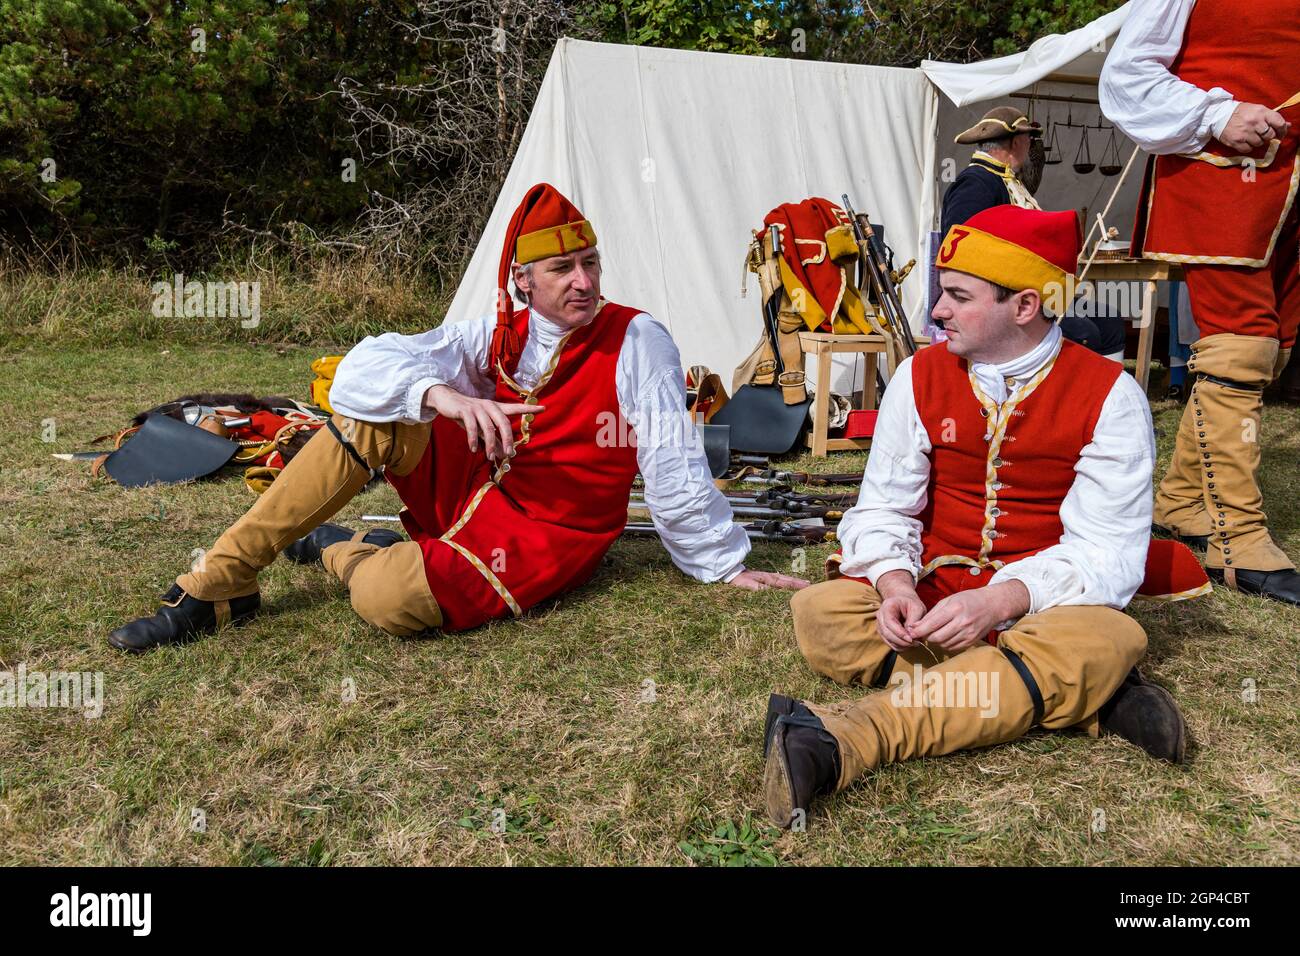 Hanoverian redcoat soldiers relax in period costume in camp re-enactment of Battle of Prestonpans, East Lothian, Scotland, UK Stock Photo